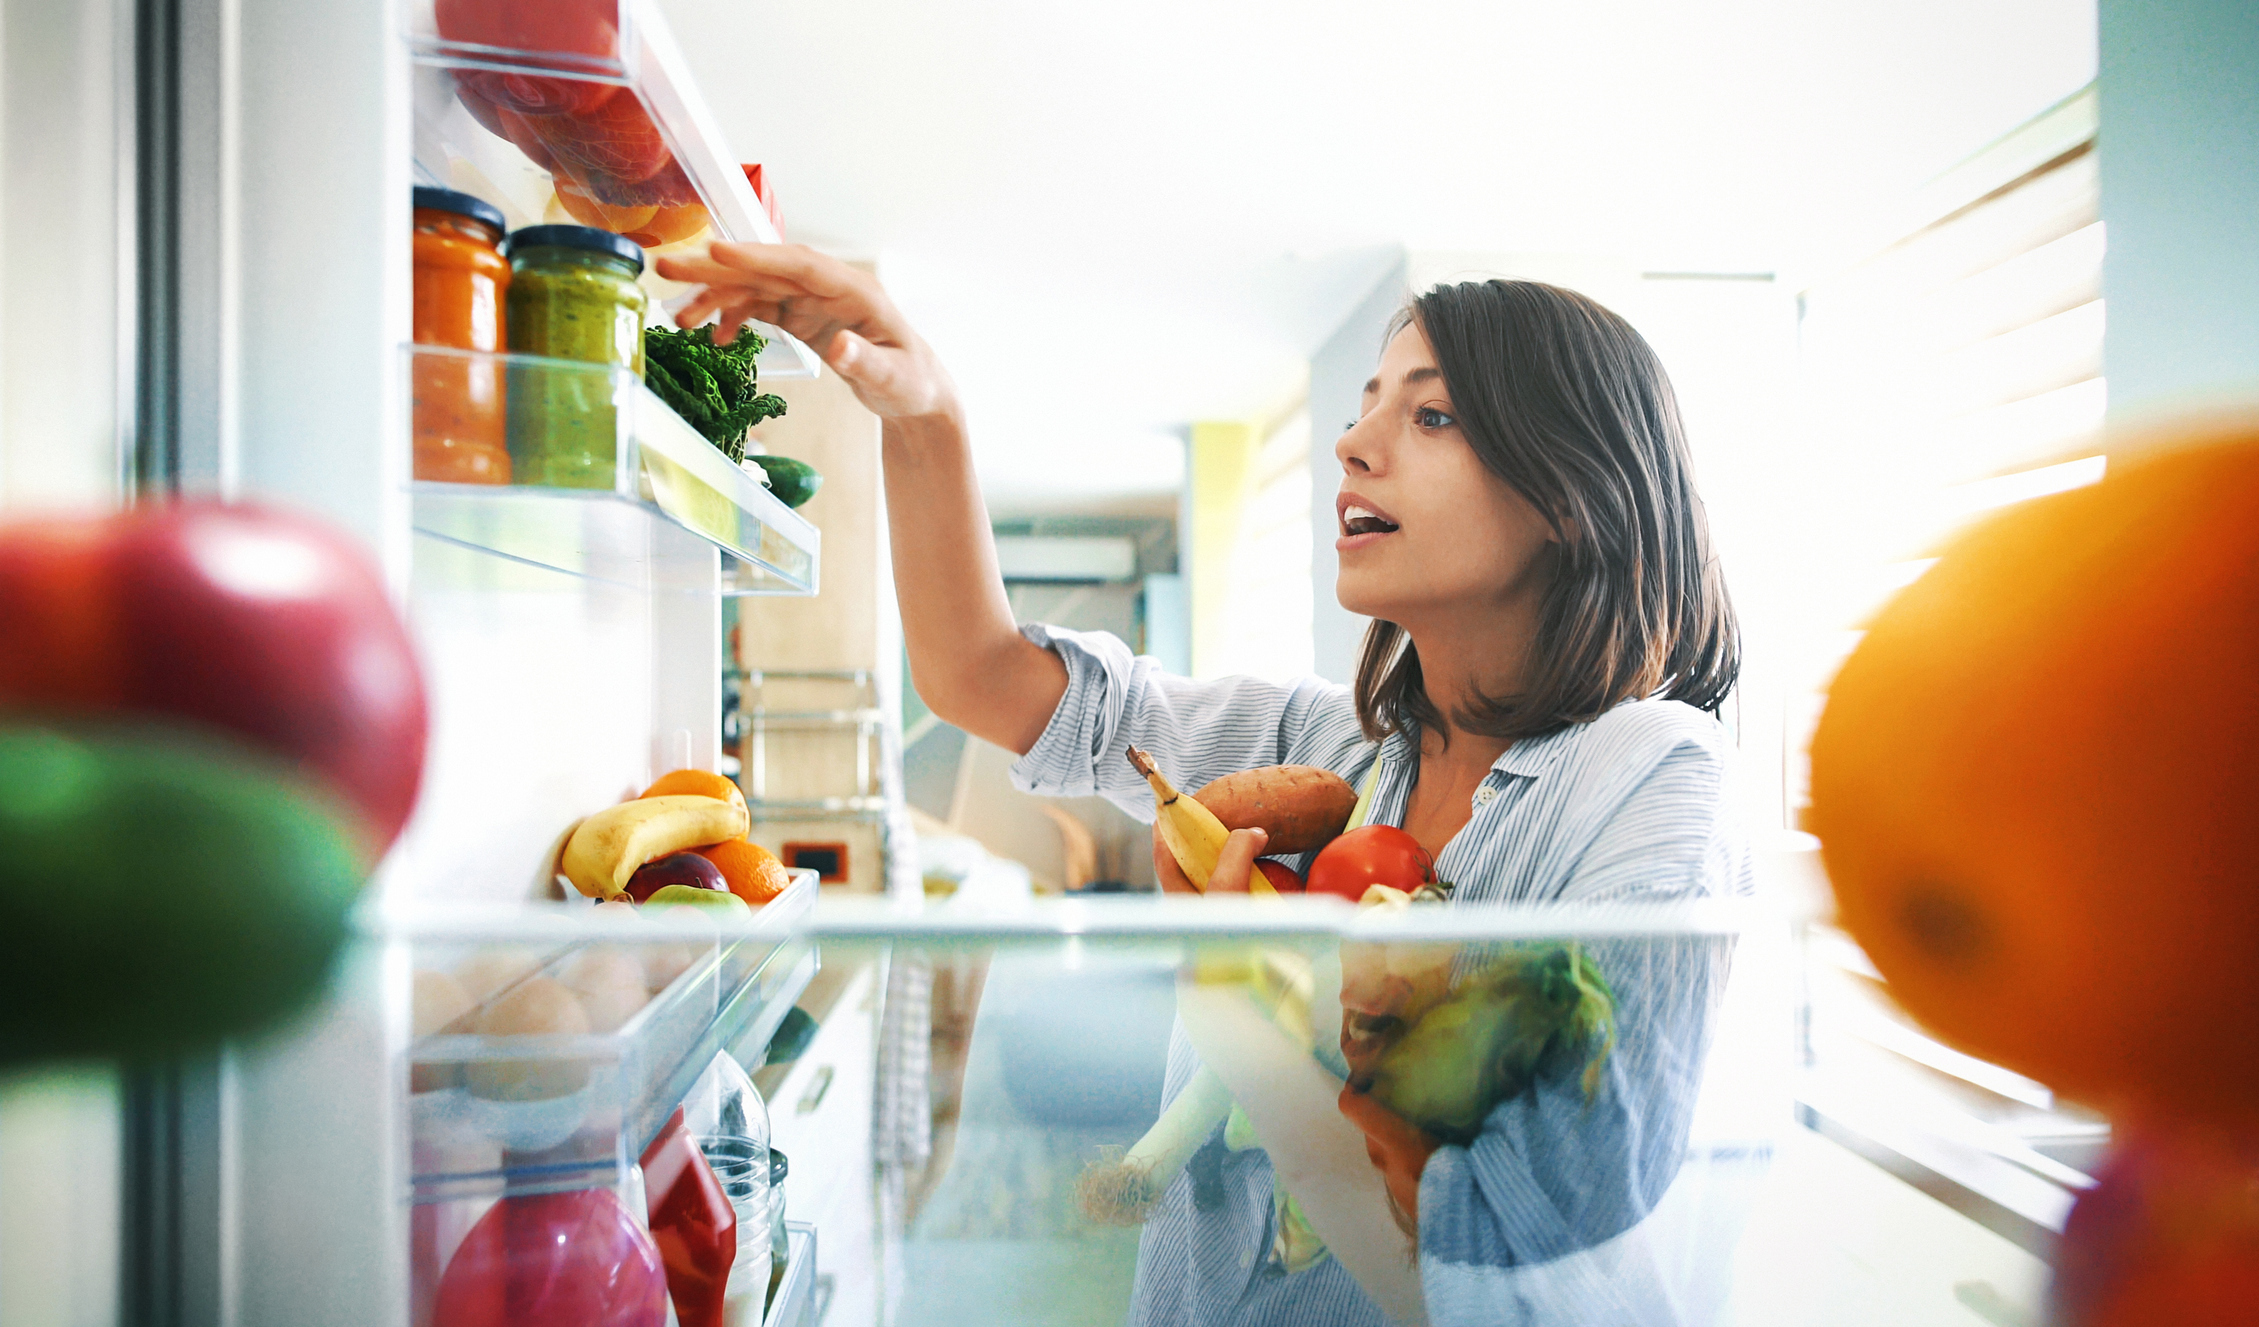 Woman picking fruits and veggies from the fridge